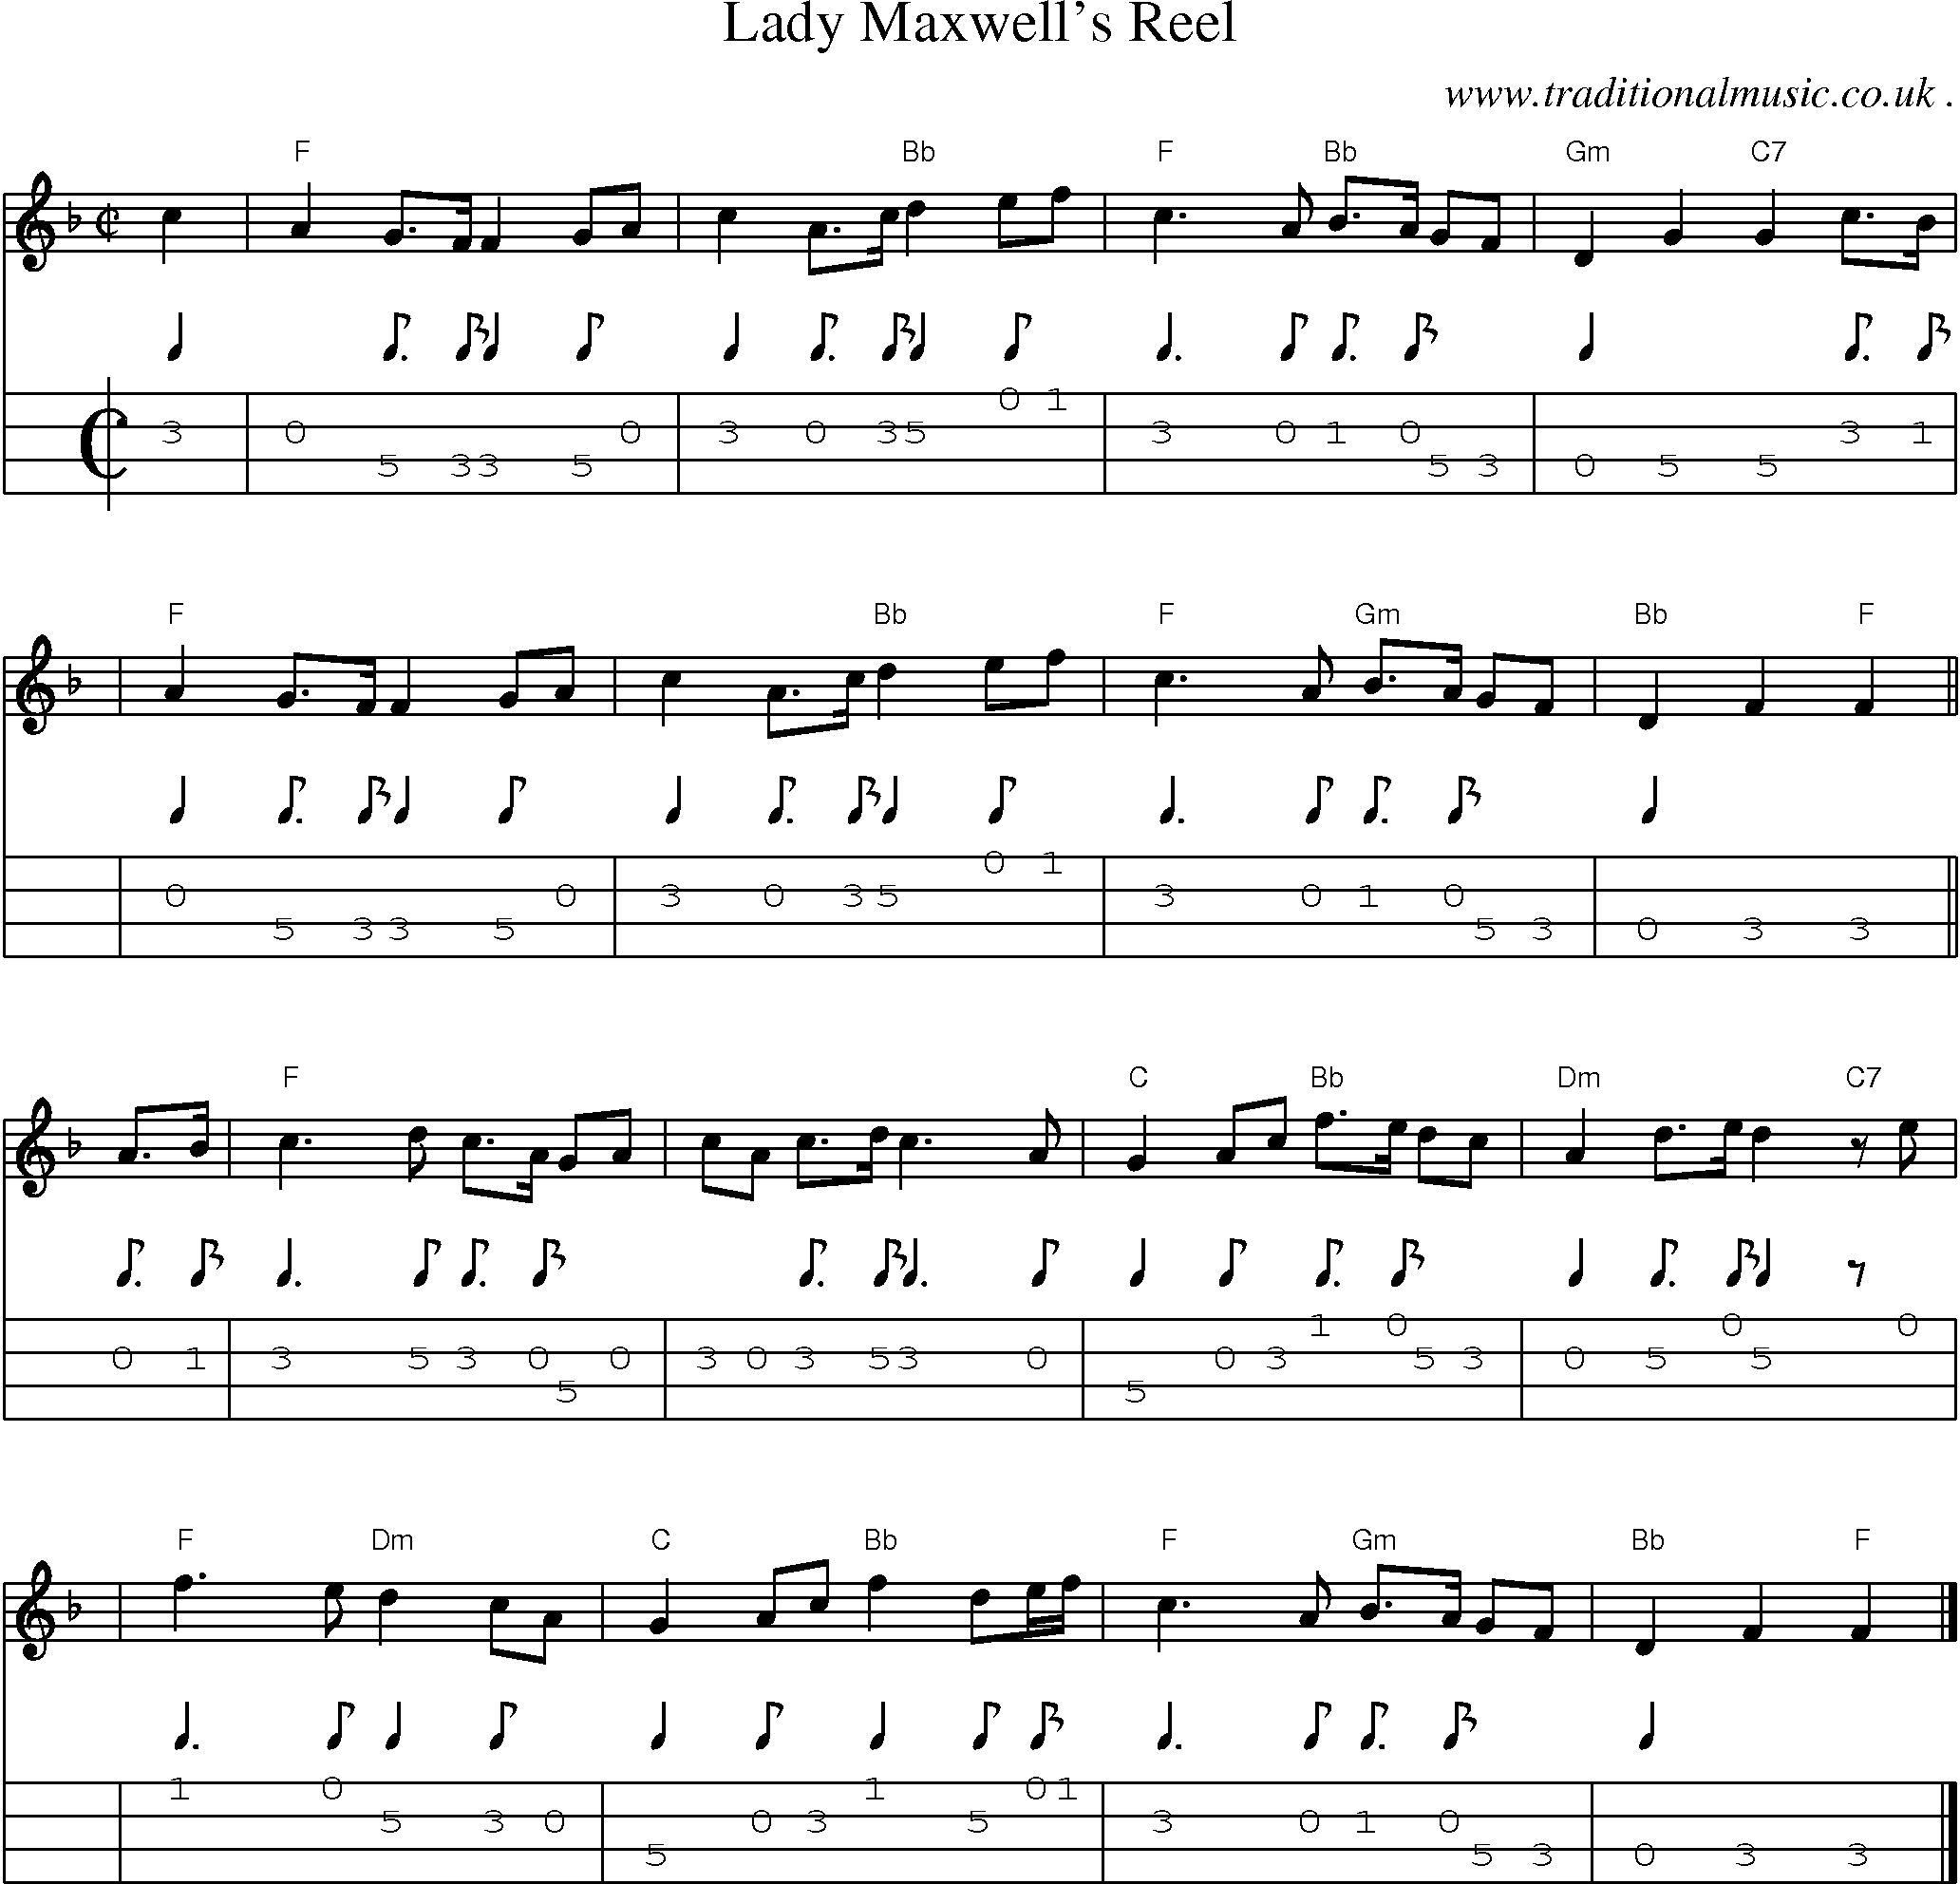 Sheet-music  score, Chords and Mandolin Tabs for Lady Maxwells Reel